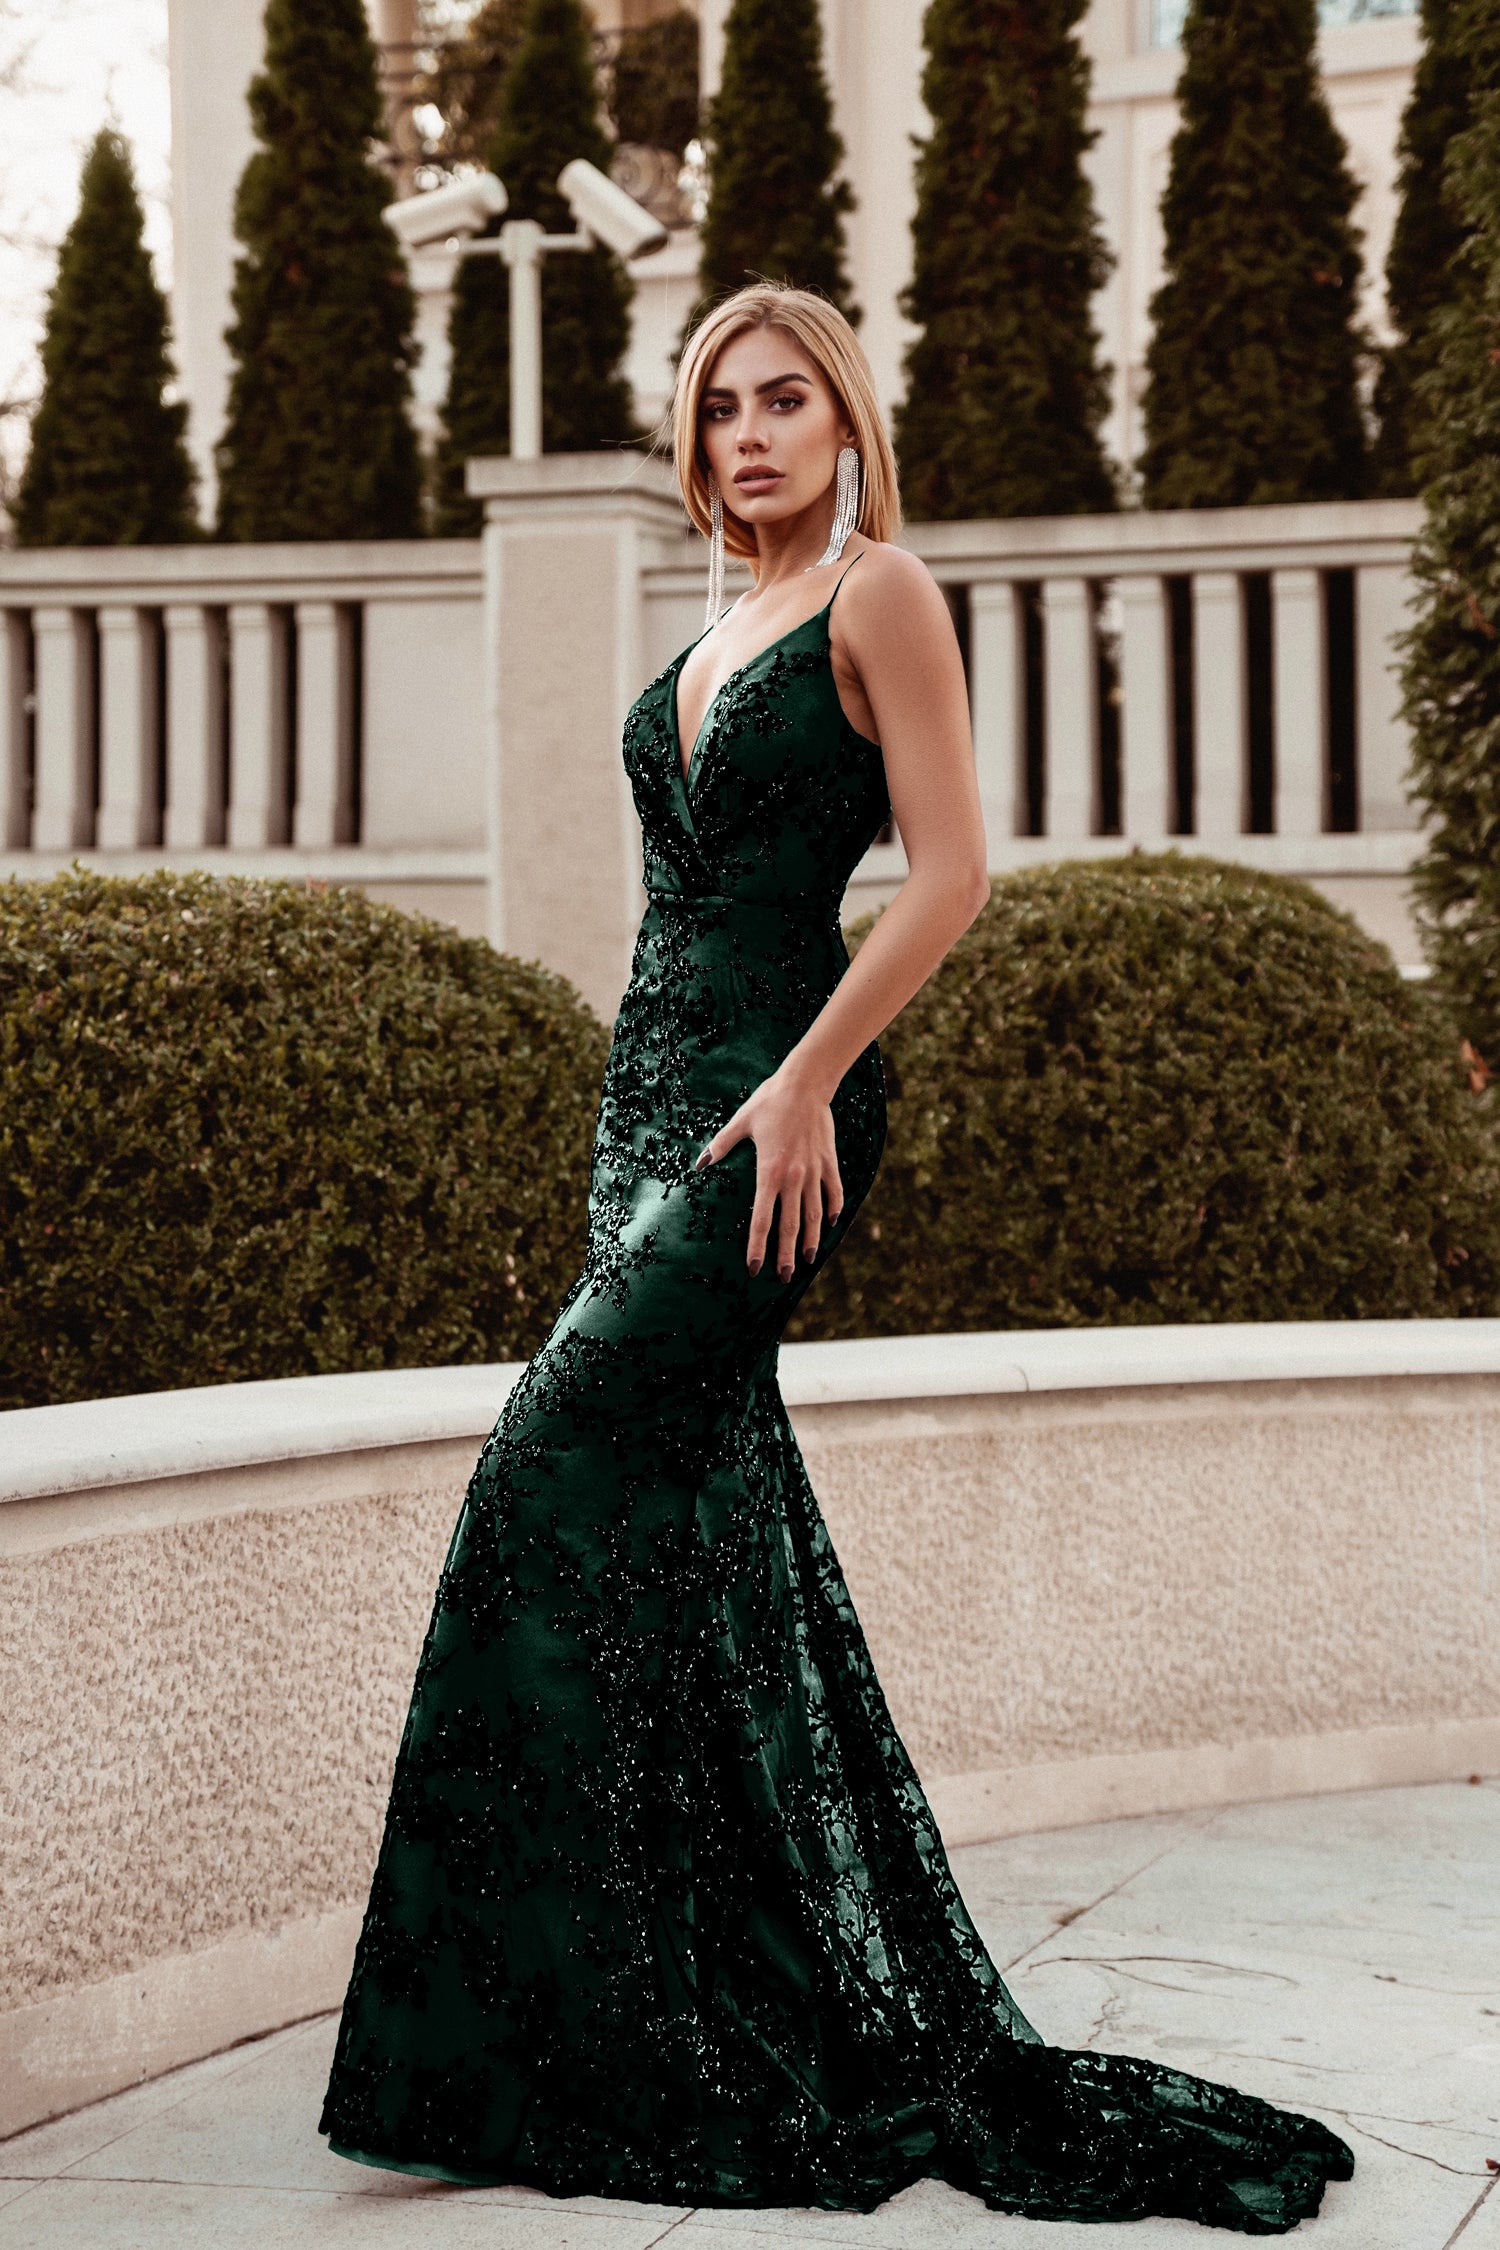 Tina Holly Couture Designer TW049 Emerald Beaded Sequin Mermaid Formal Gown